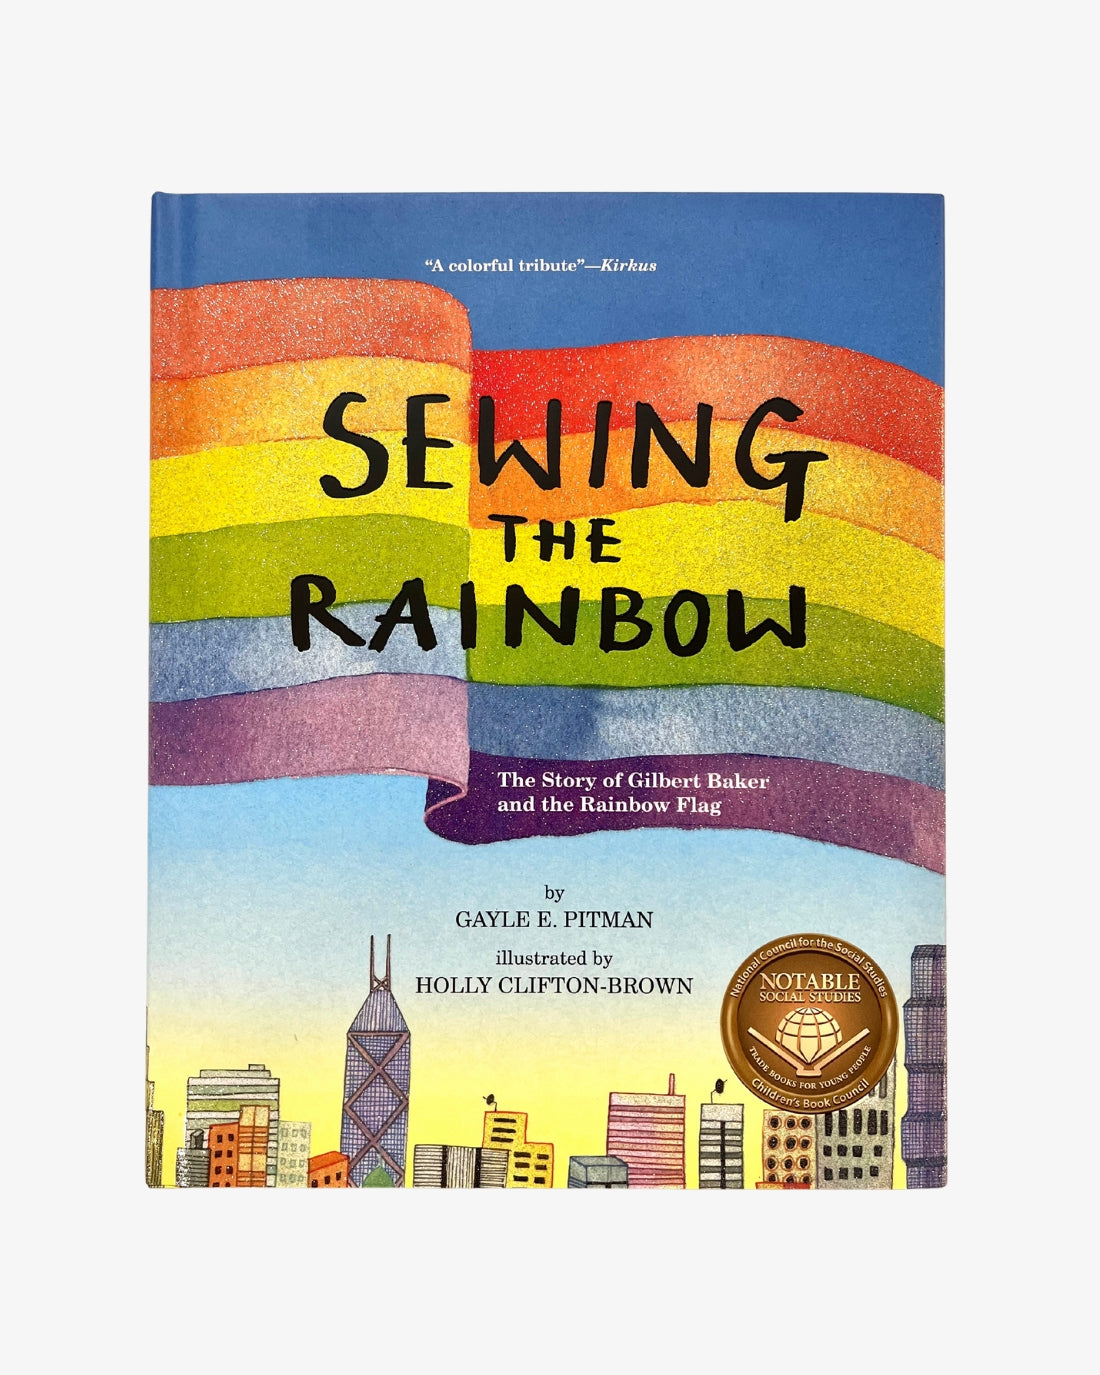 Sewing the Rainbow: The Story of Gilbert Baker and the Rainbow Flag by Gayle E. Pitman, PhD